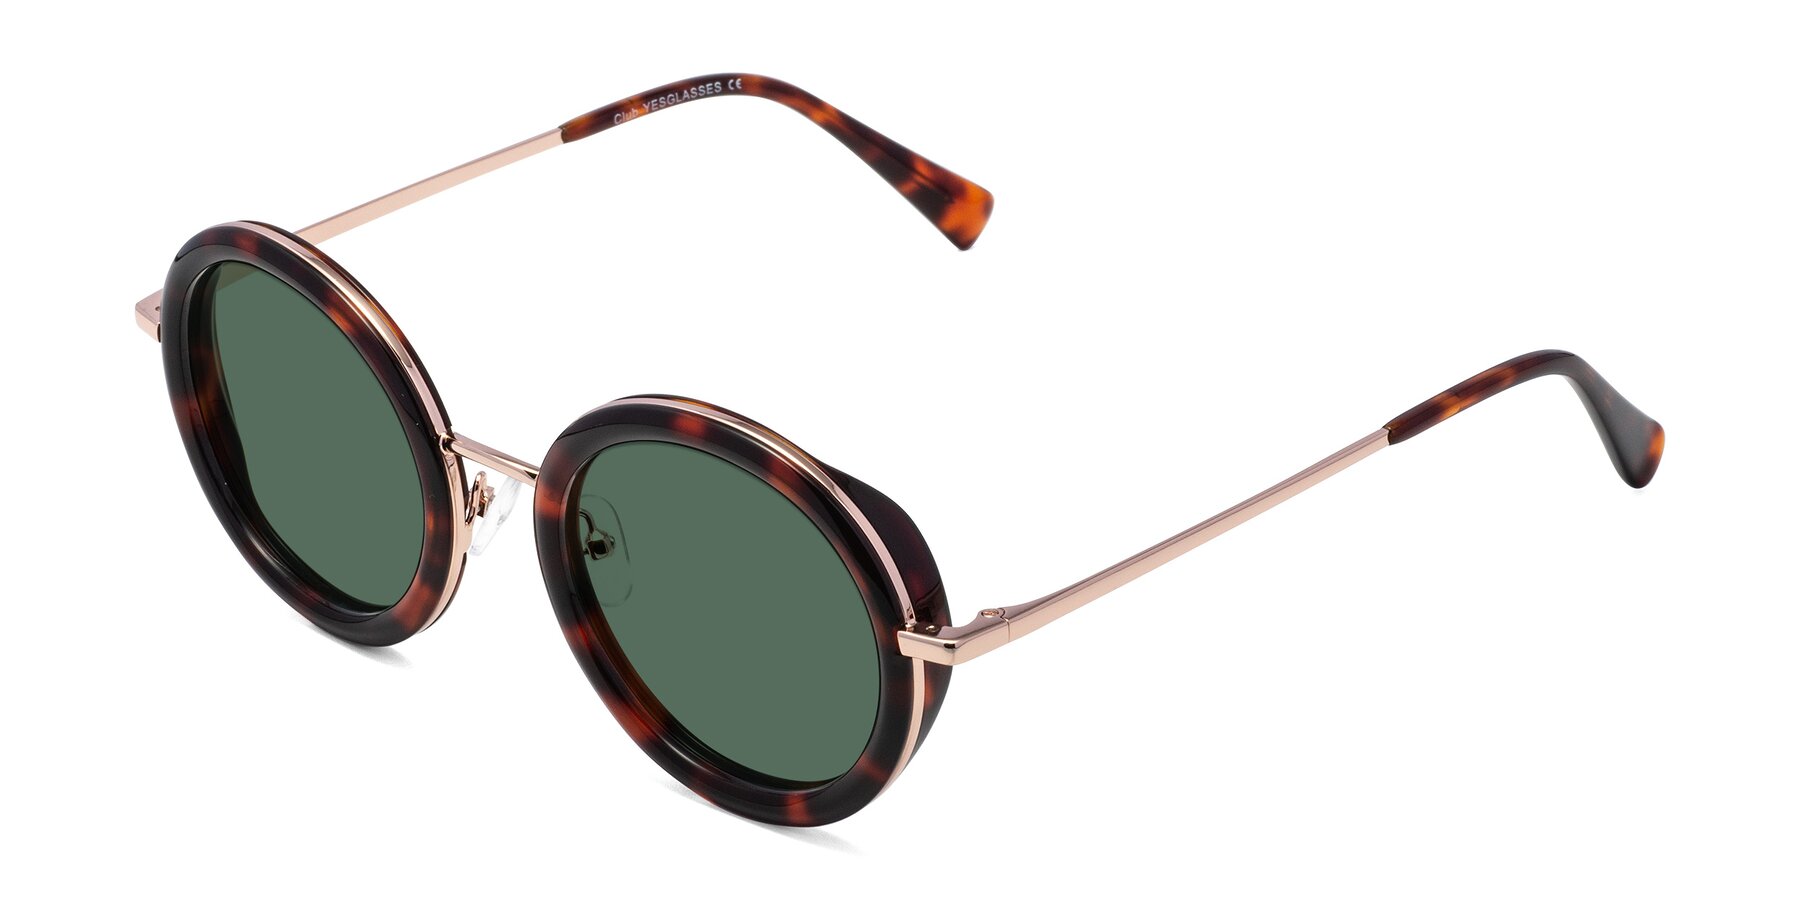 Angle of Club in Tortoise-Rose Gold with Green Polarized Lenses